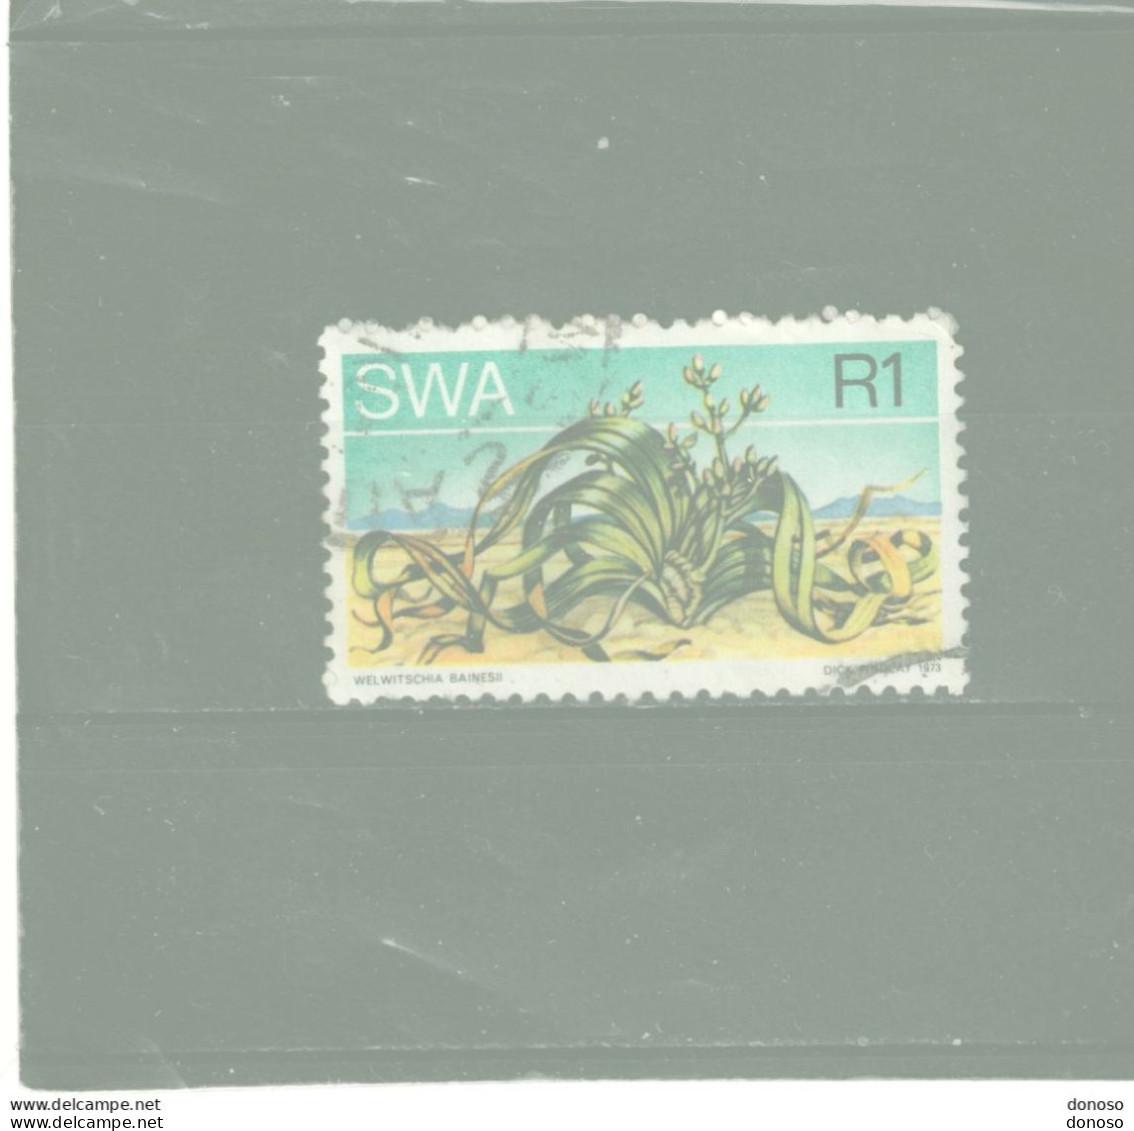 SWA SUD OUEST AFRICAIN 1973 Welwischia Yvert 331 Oblitéré Cote Yv 6,50 Euros - África Del Sudoeste (1923-1990)